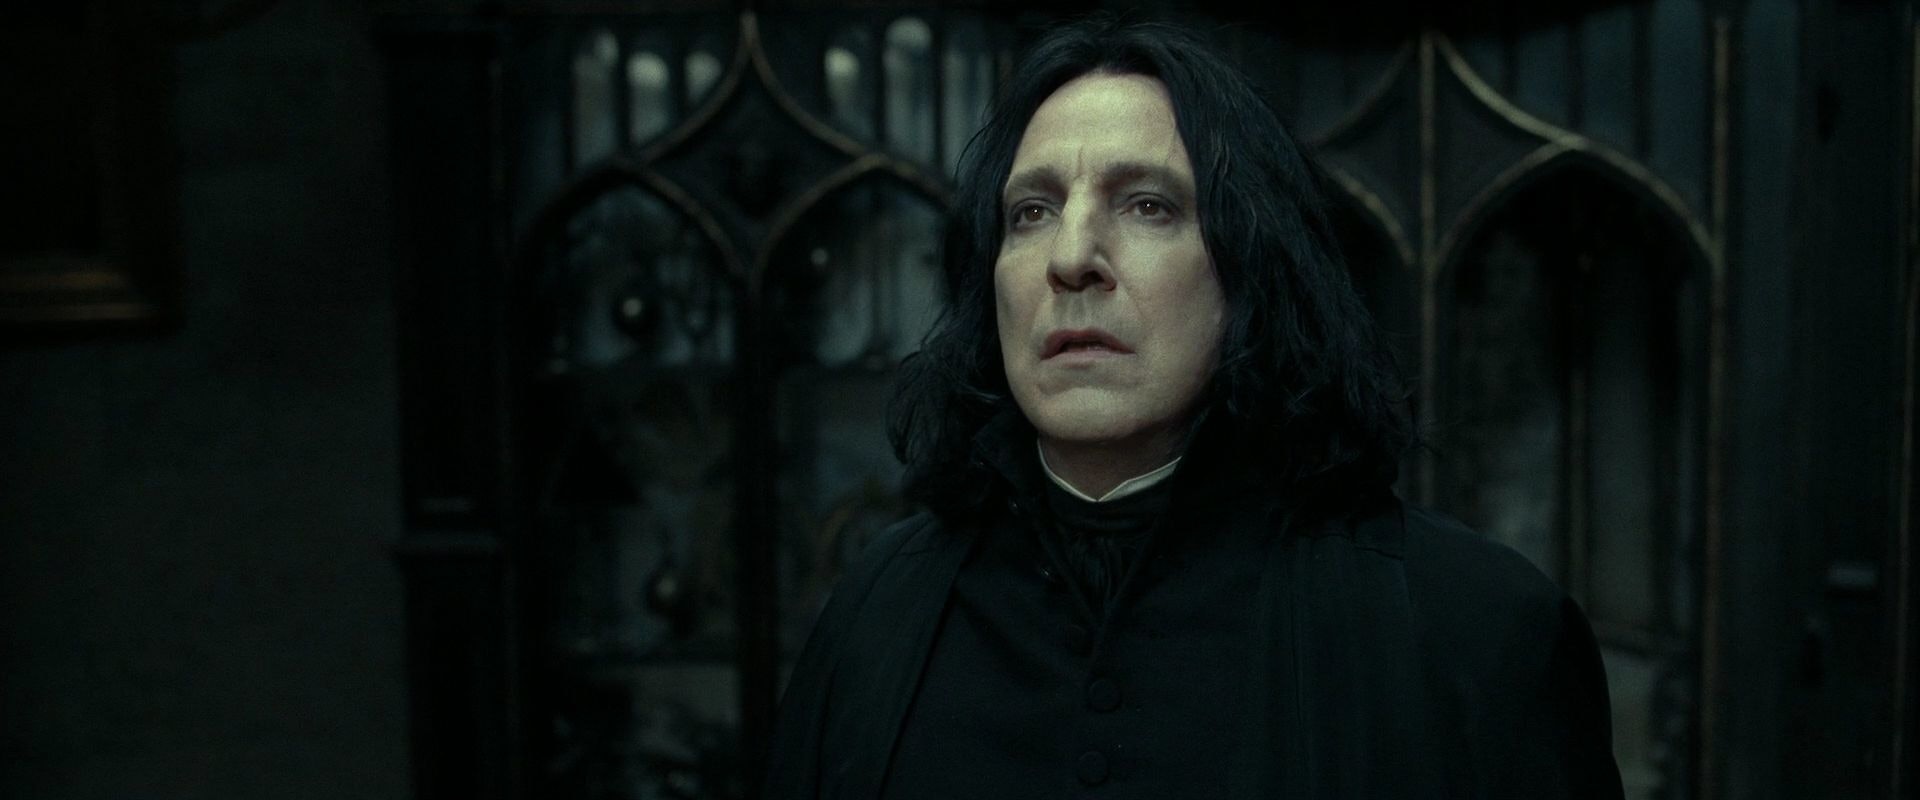 Image result for severus snape